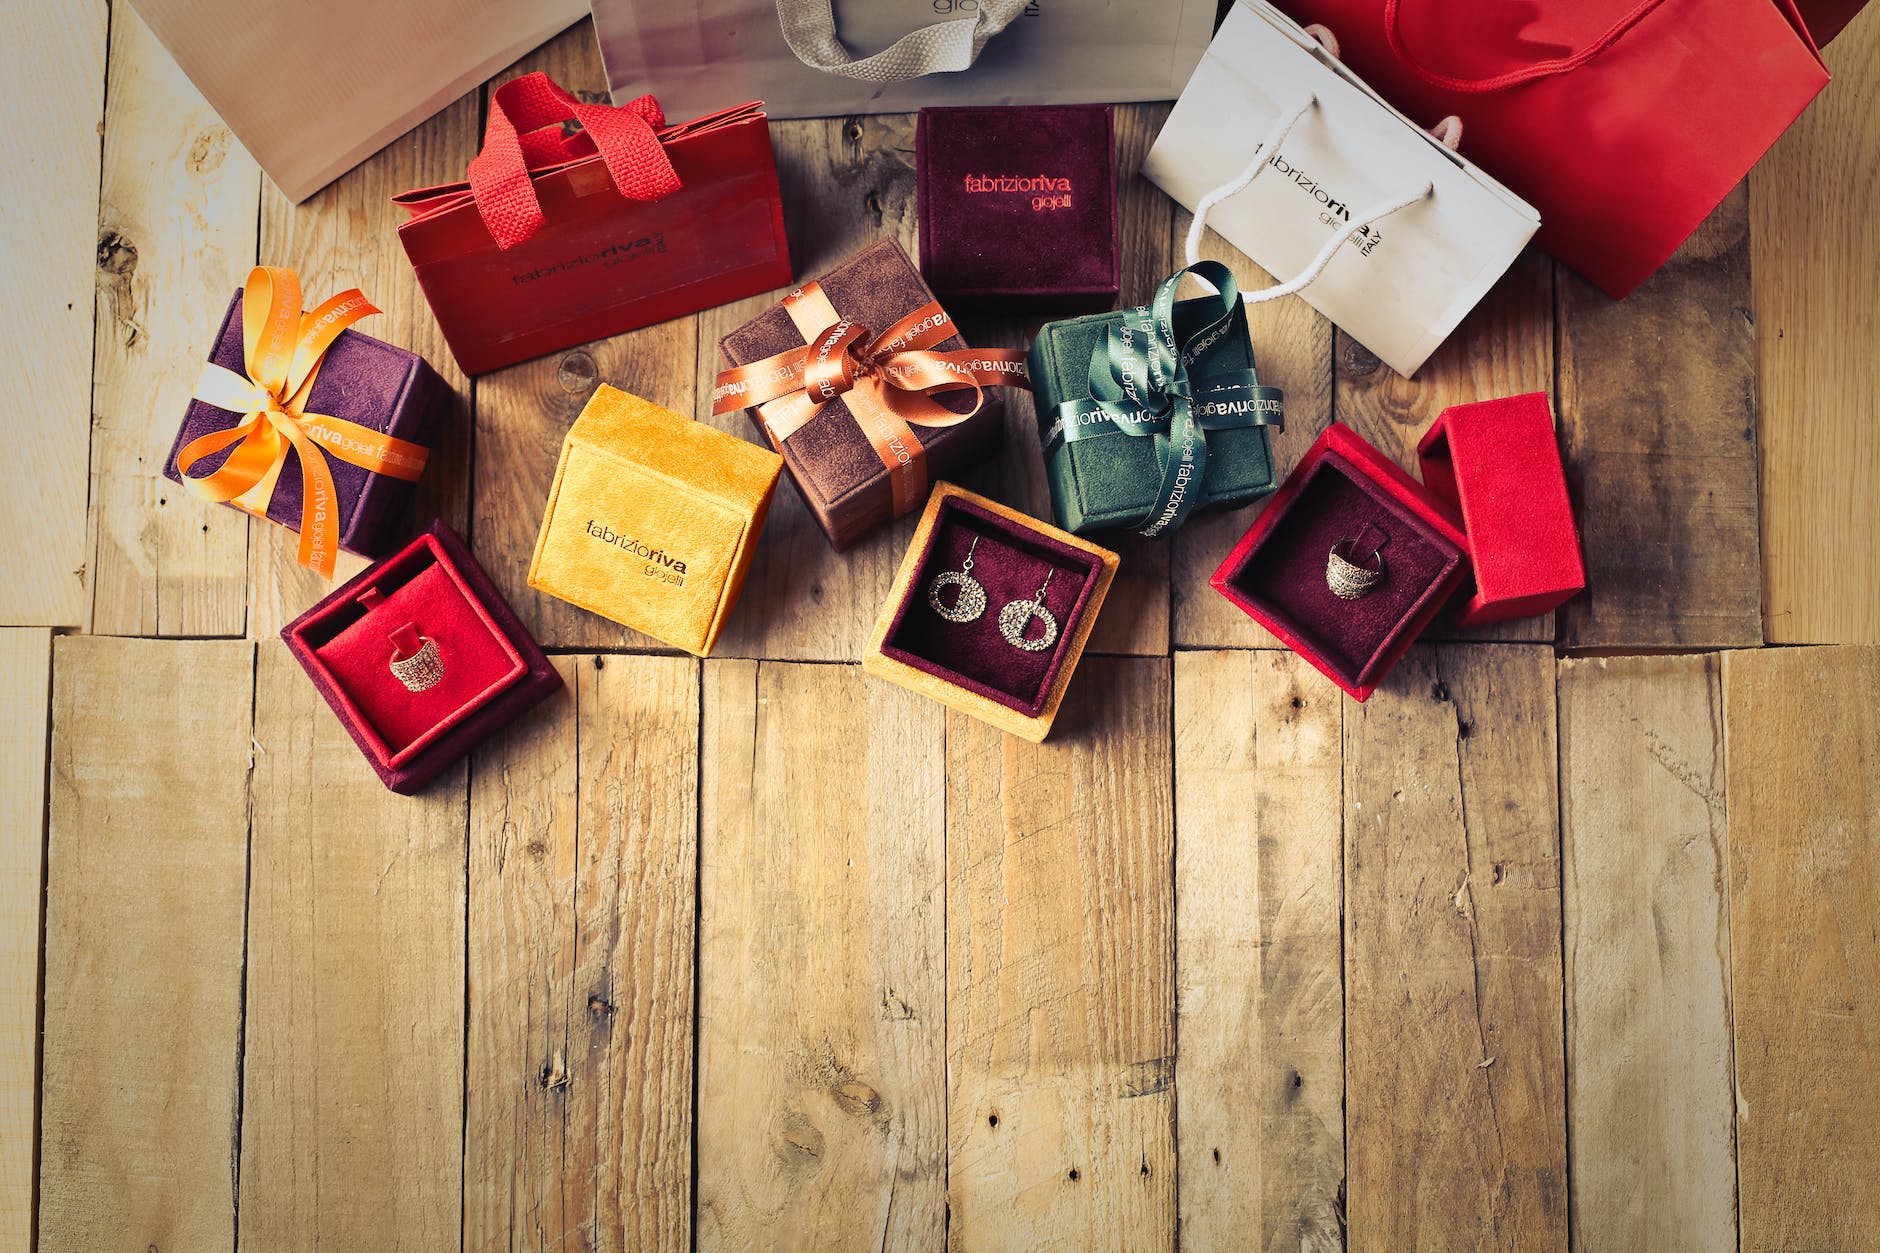 assorted gift boxes on brown wooden floor surface